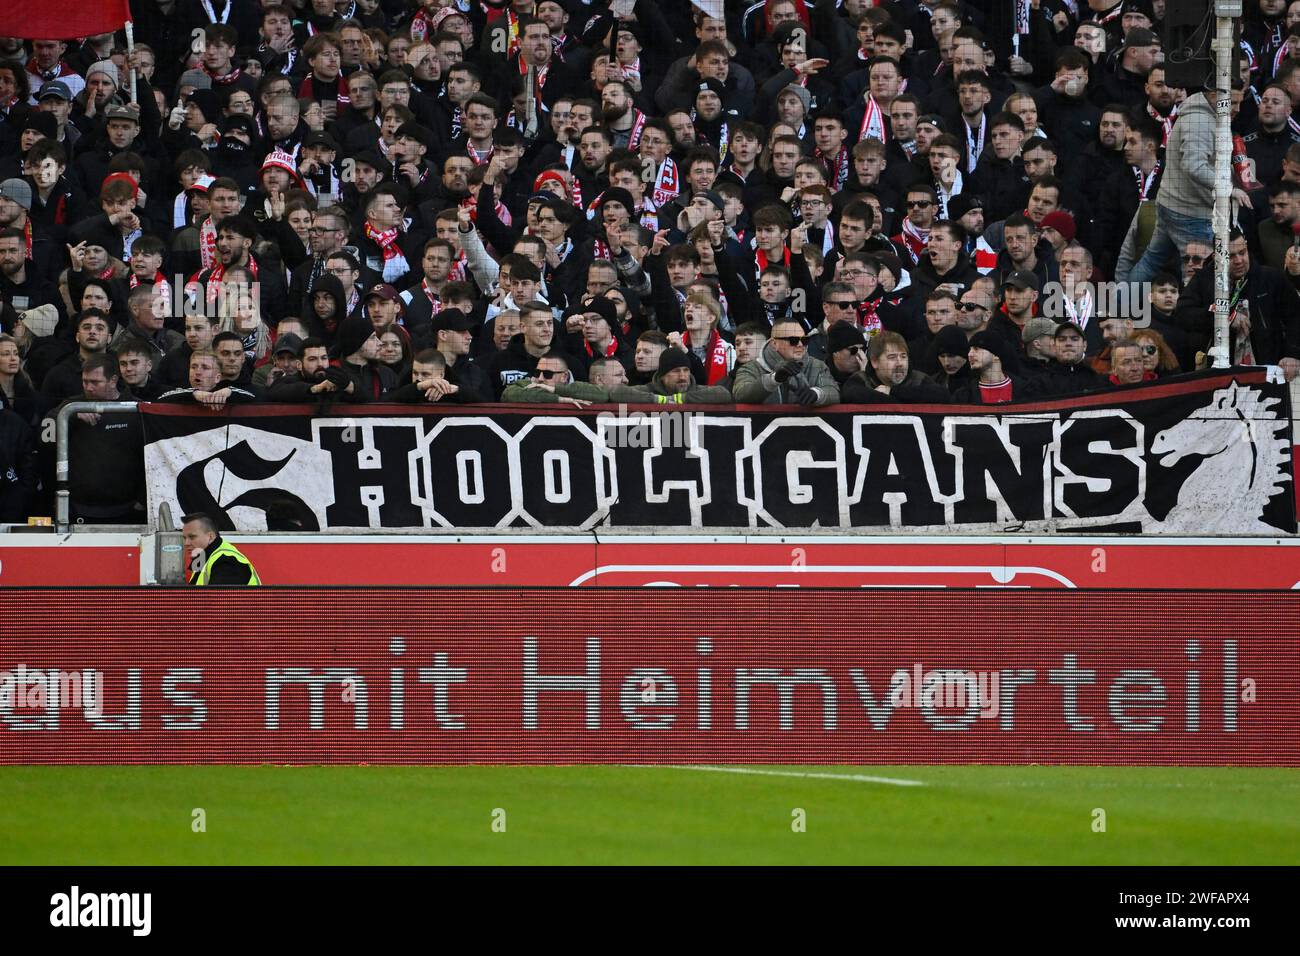 Banner, fan poster, banner, poster, banner, fan campaign HOOLIGANS in front of perimeter advertising WITH HOME ADVANTAGE, Ultras, fan group Stock Photo